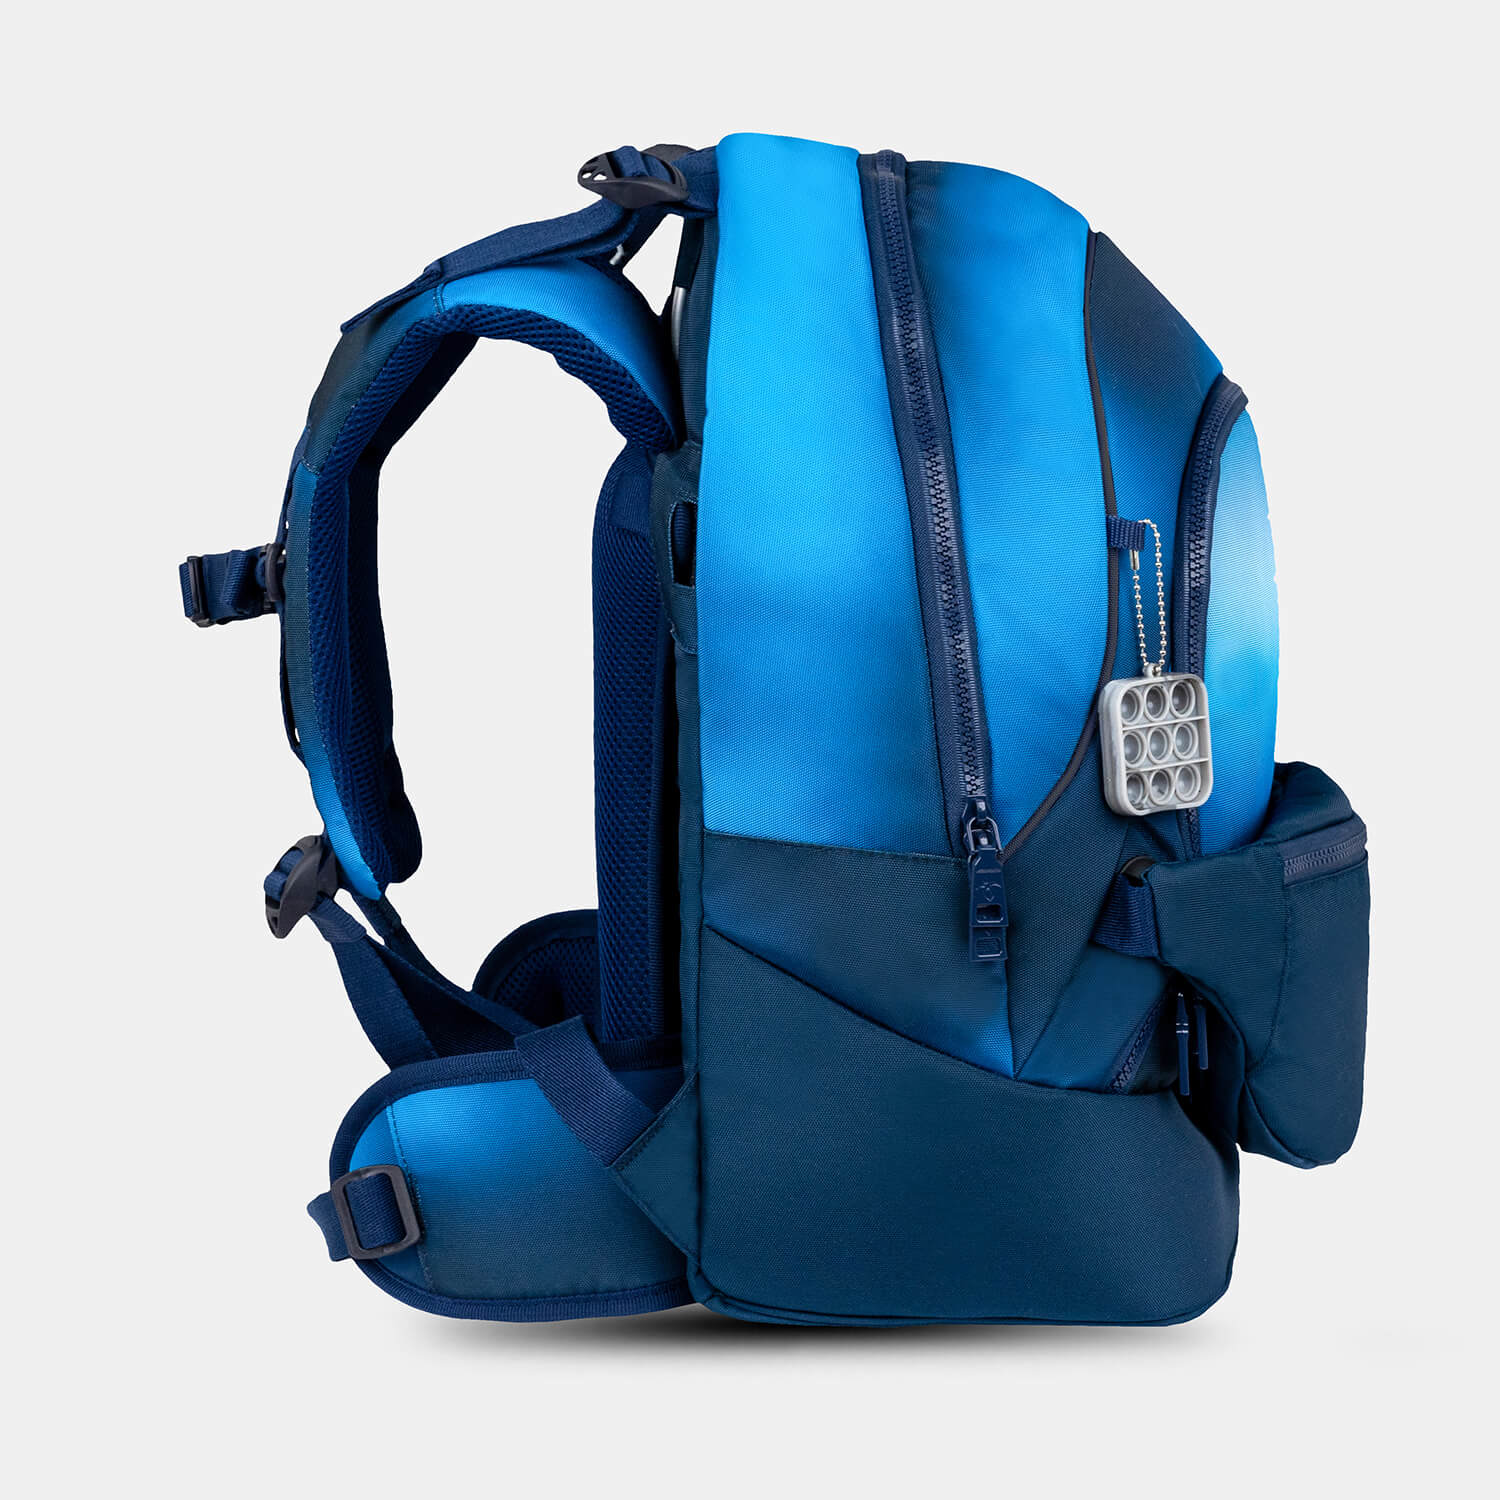 Backpack & Fanny Pack Blue Navy Schoolbag with GRATIS Gymbag